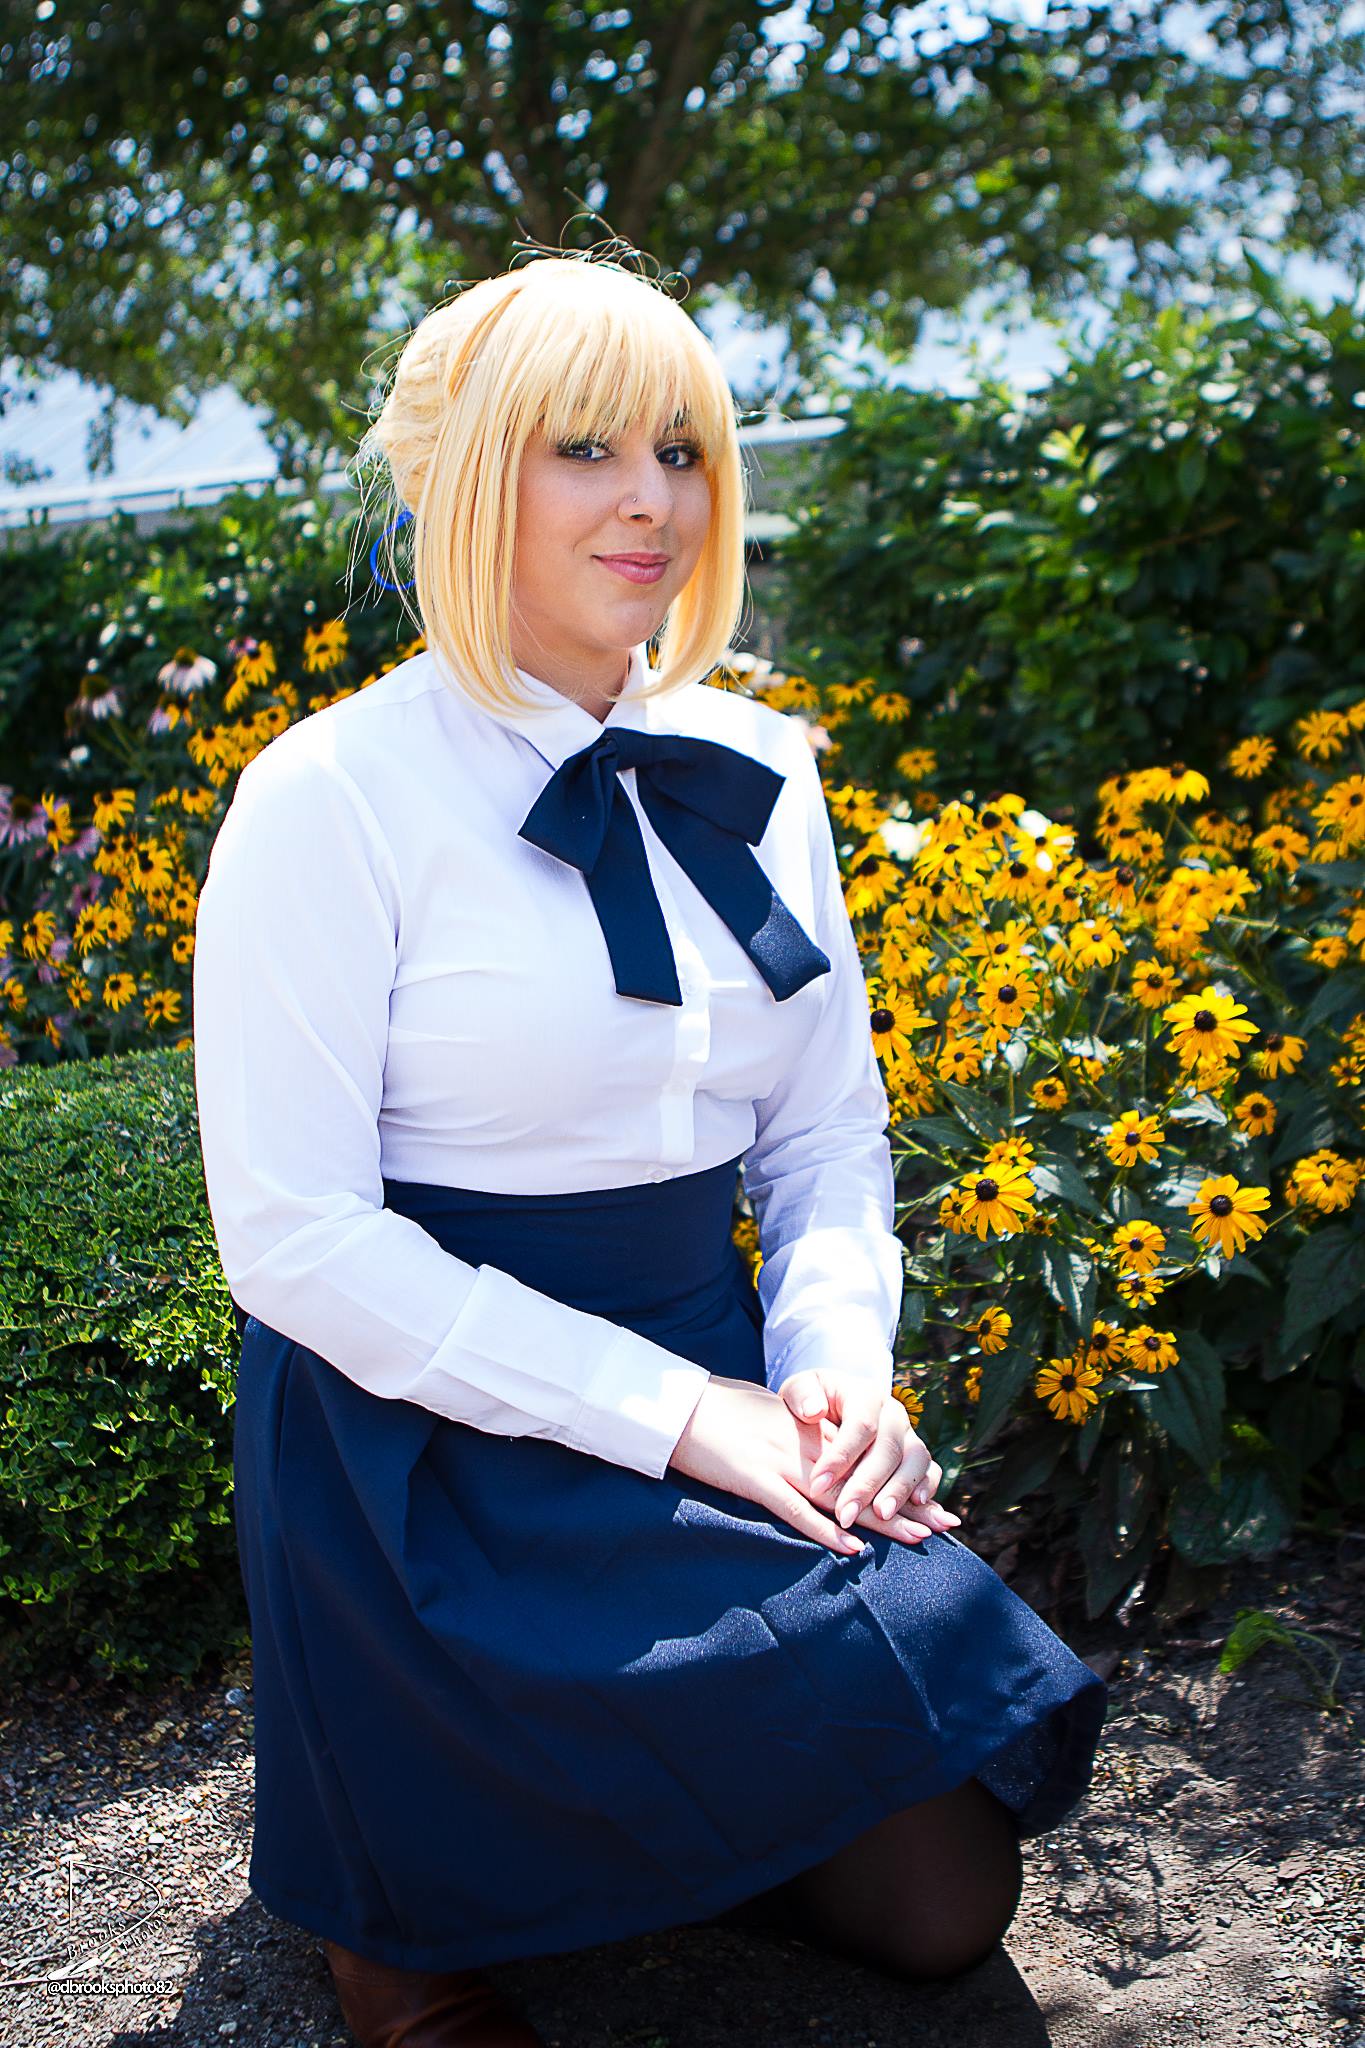 Saber (Fate/Stay Night) by Rae Marie Cosplay | ACParadise.com